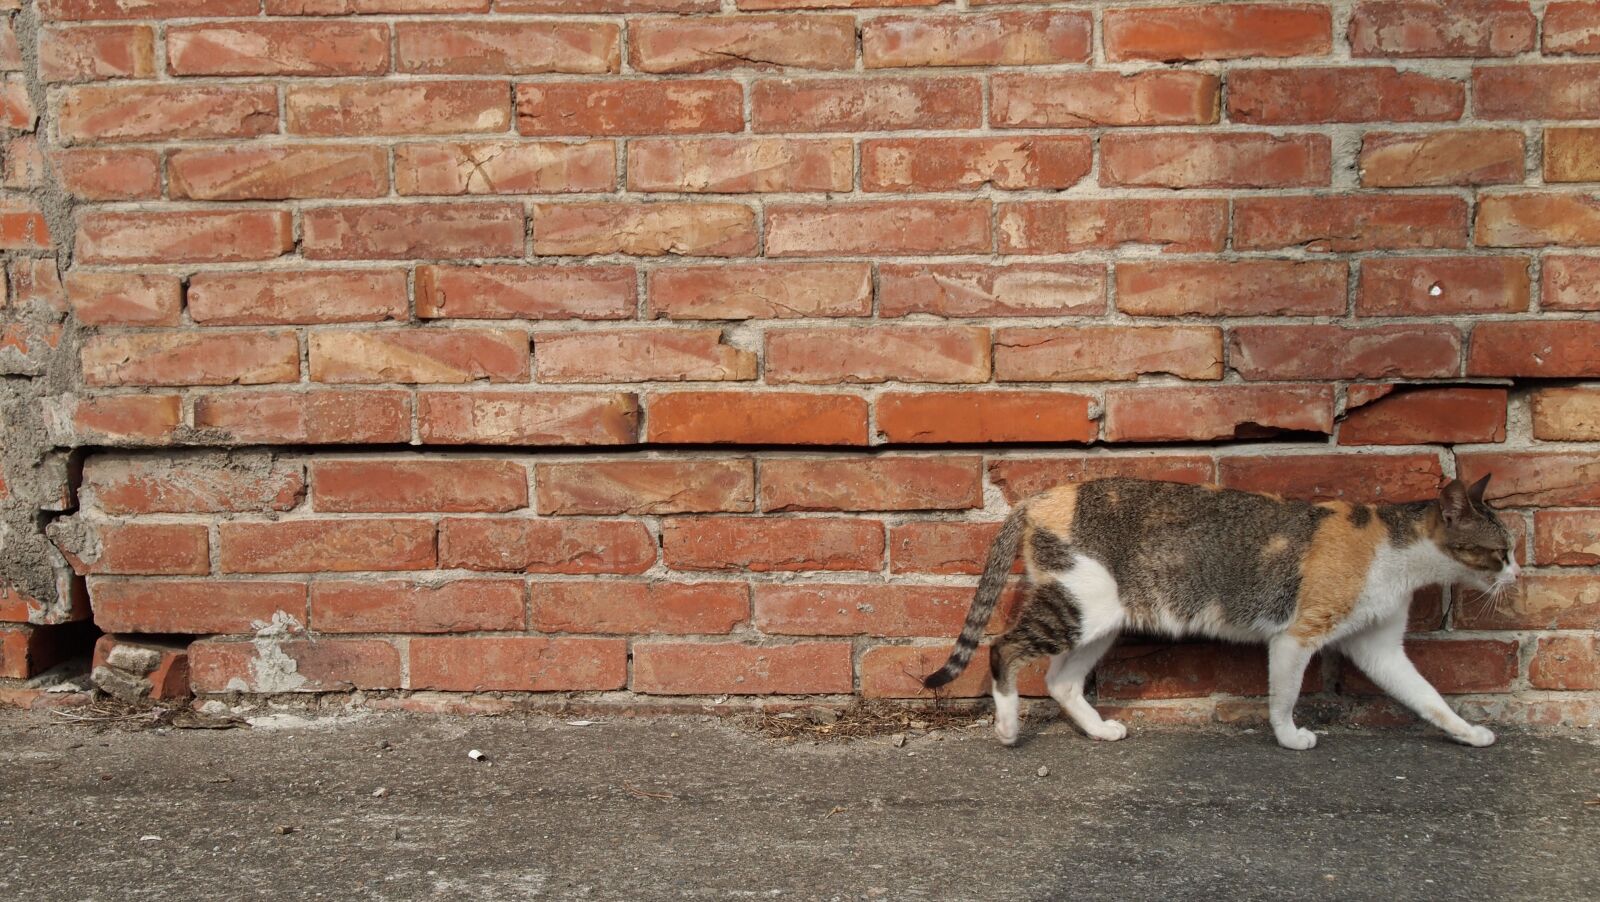 Olympus PEN E-PL2 sample photo. Cat, brick walls, country photography